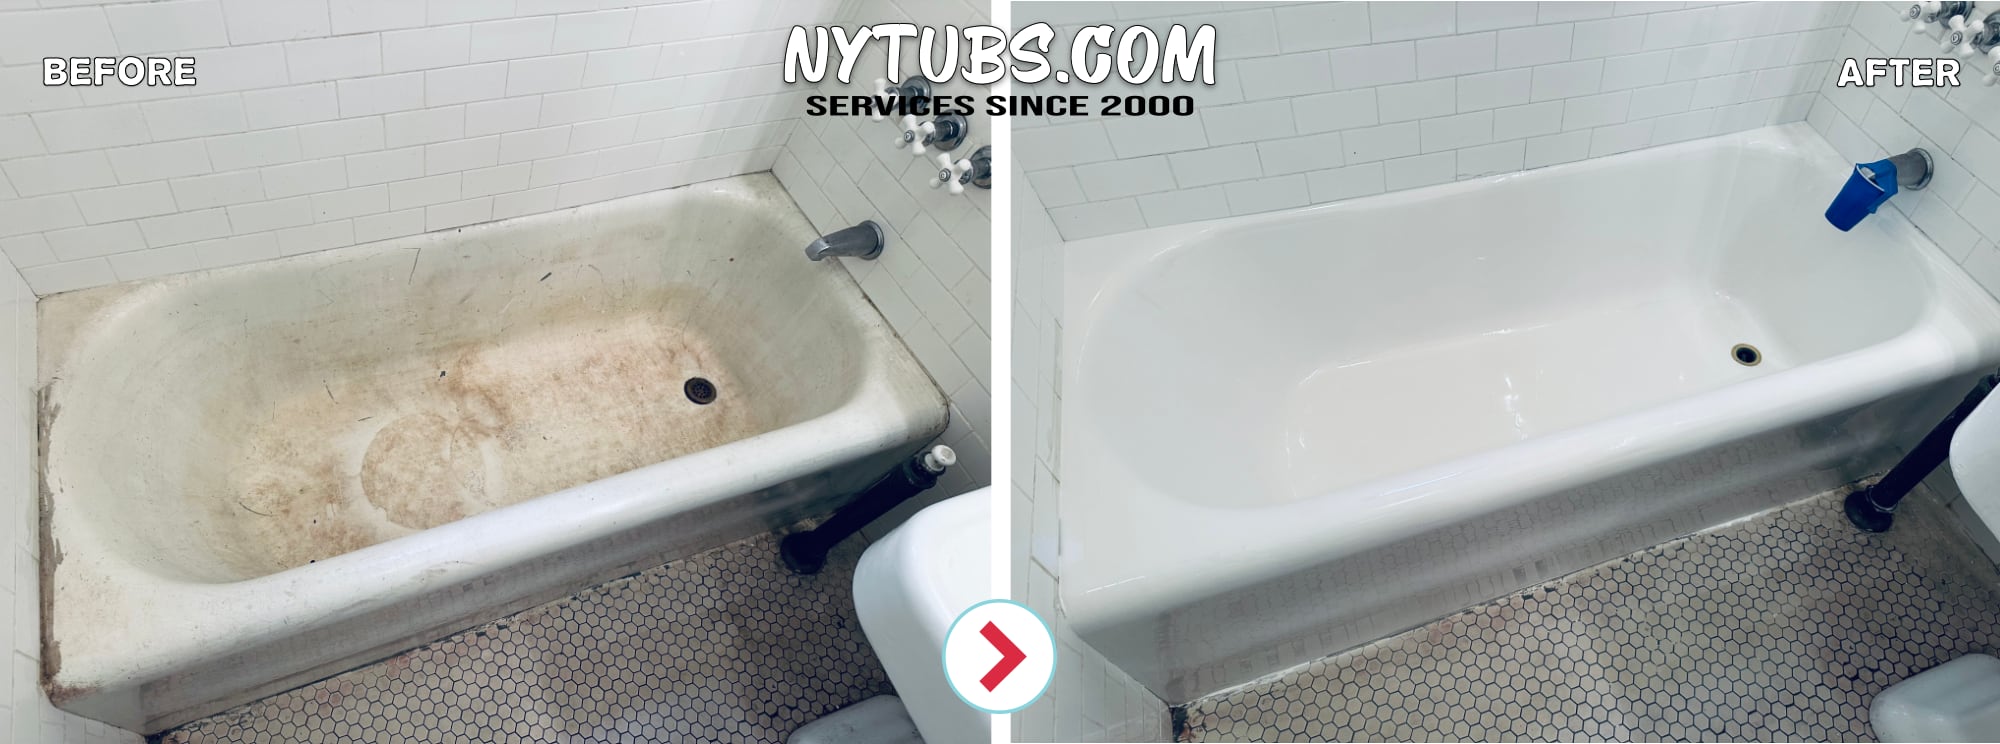 Bathtub Reglazing before and after